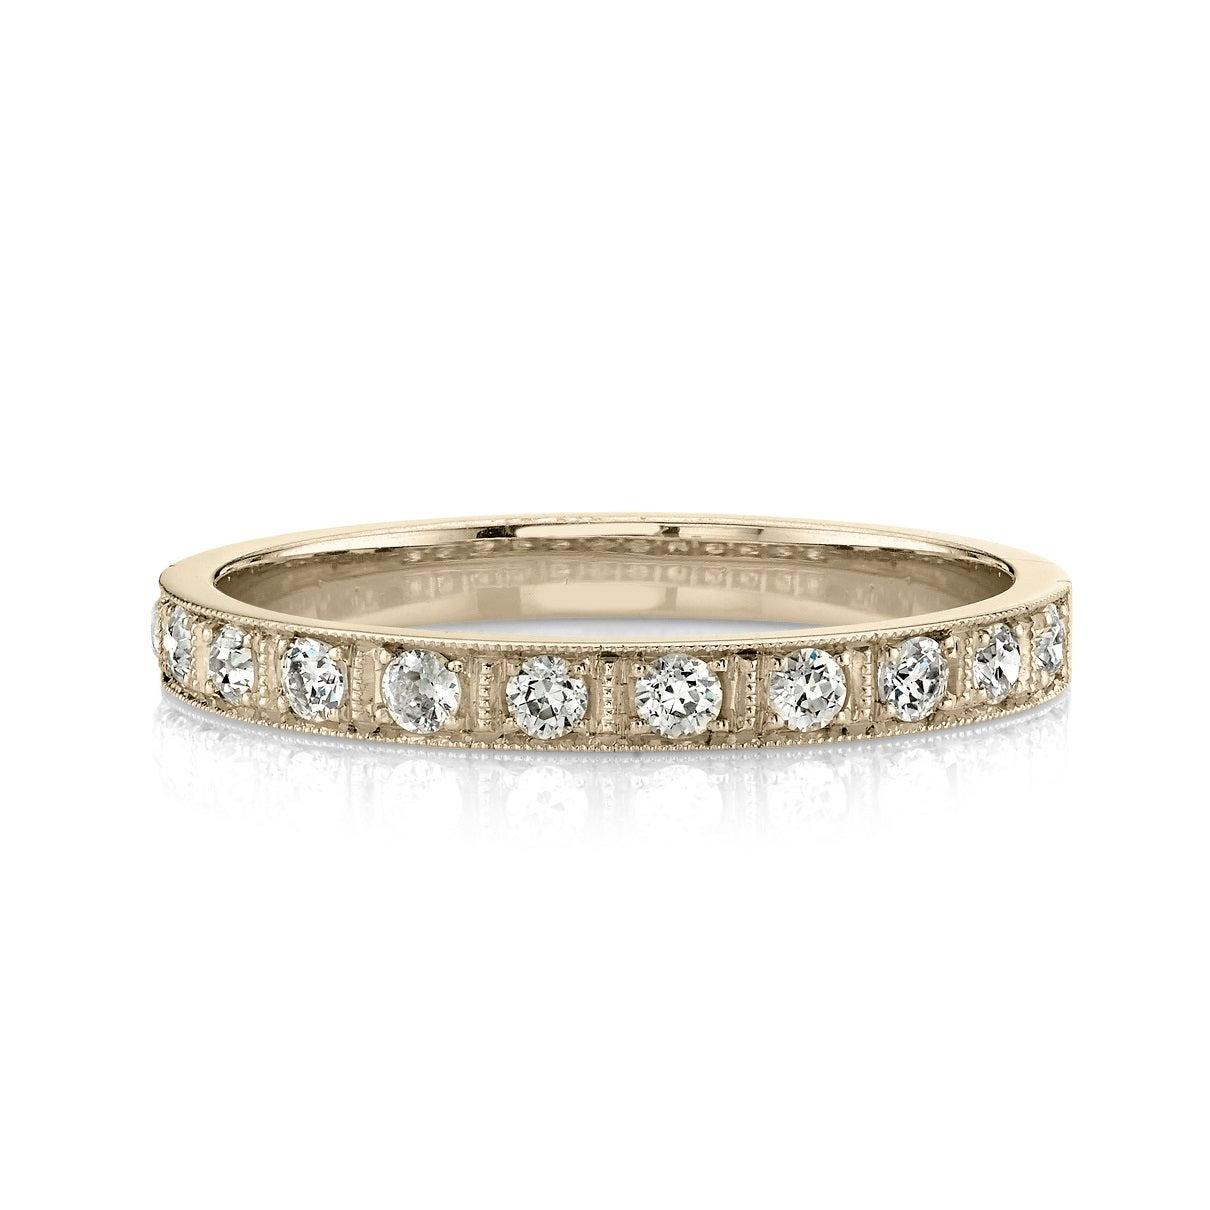 For Sale:  Handcrafted Hadley Old European Cut Diamond Eternity Band by Single Stone 3